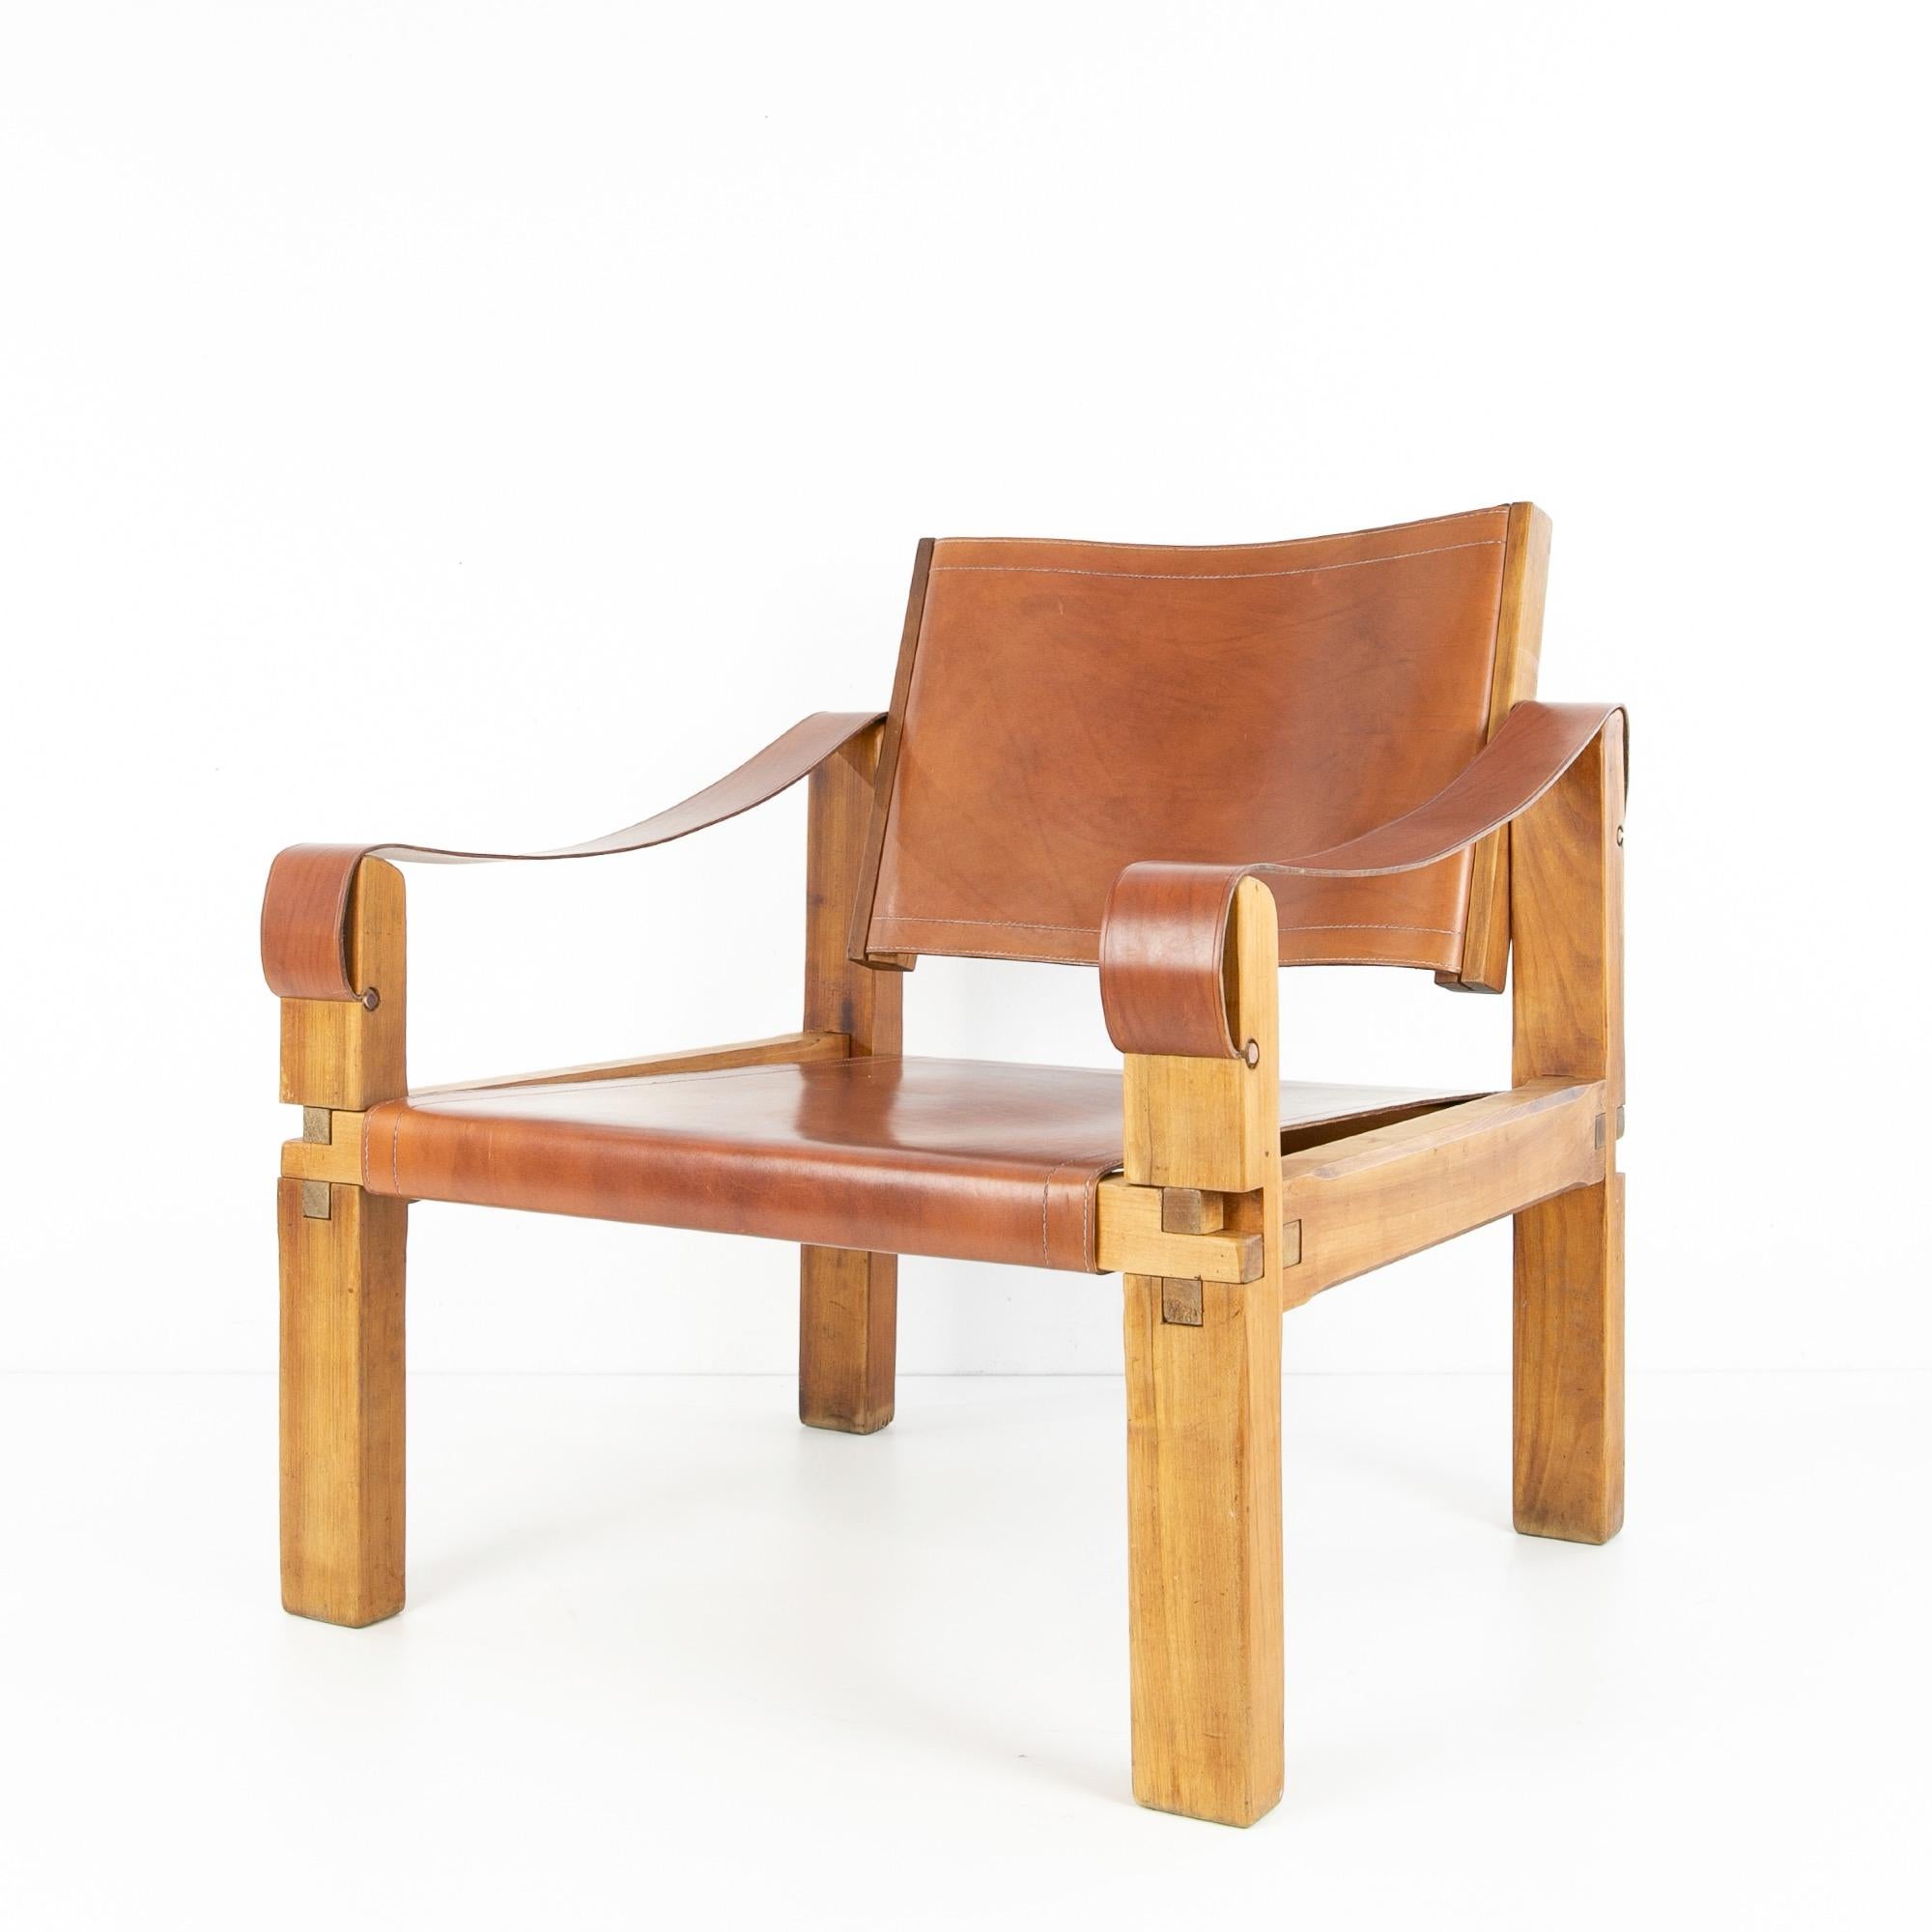 Vintage finely proportioned S10 or so called Sahara elmwood and leather armchair designed and manufactured by Pierre Chapo (France),
circa 1960.
Smart construction, very nice proportions
Piqures Sellier natural leather
The wood structure has a